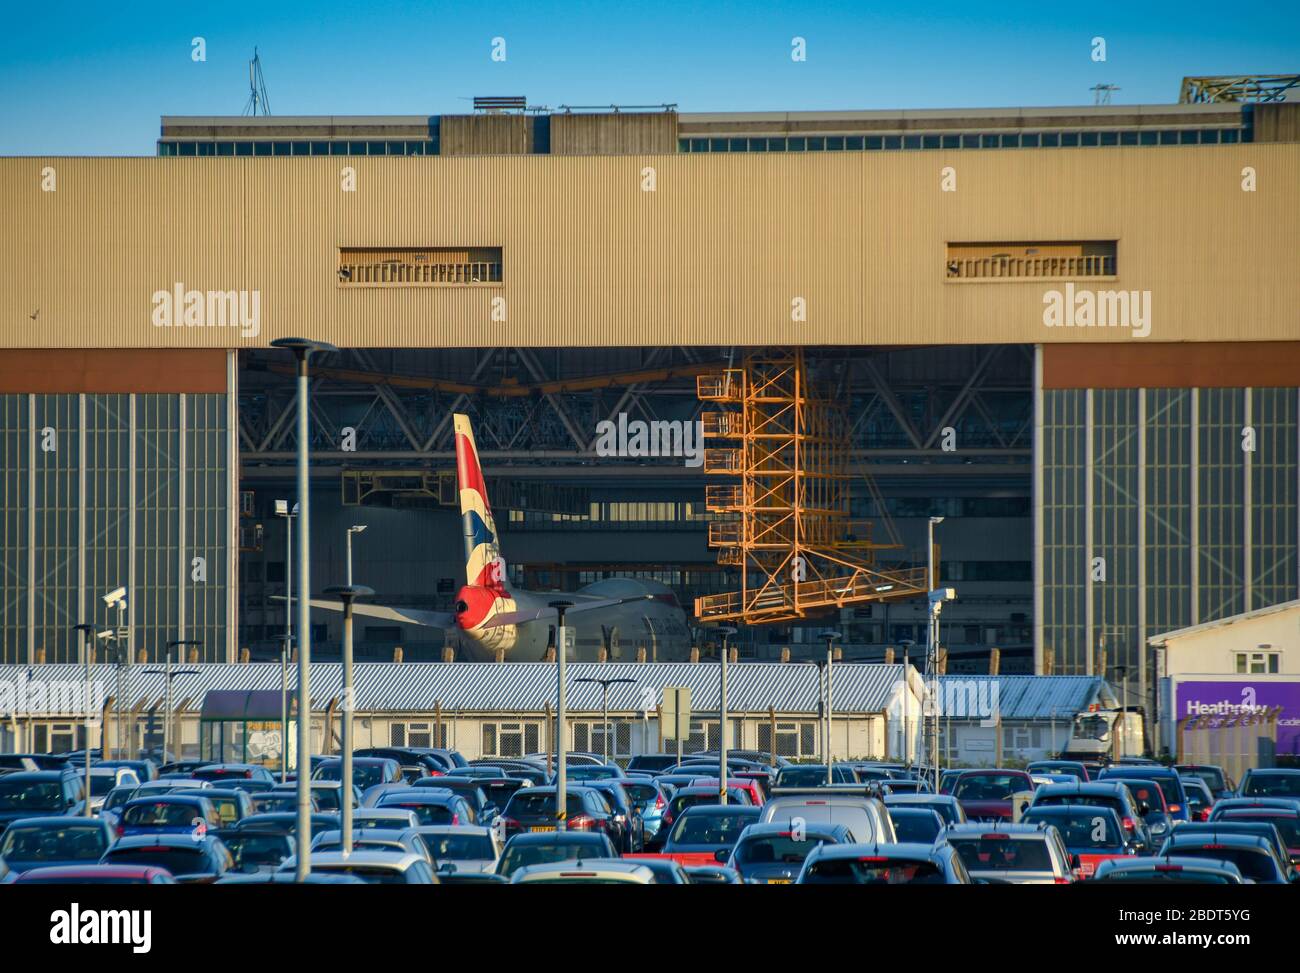 LONDON HEATHROW AIRPORT - JUNE 2018: British Airways maintenance hangar at London Heathrow airport with doors open and a plane being serviced Stock Photo